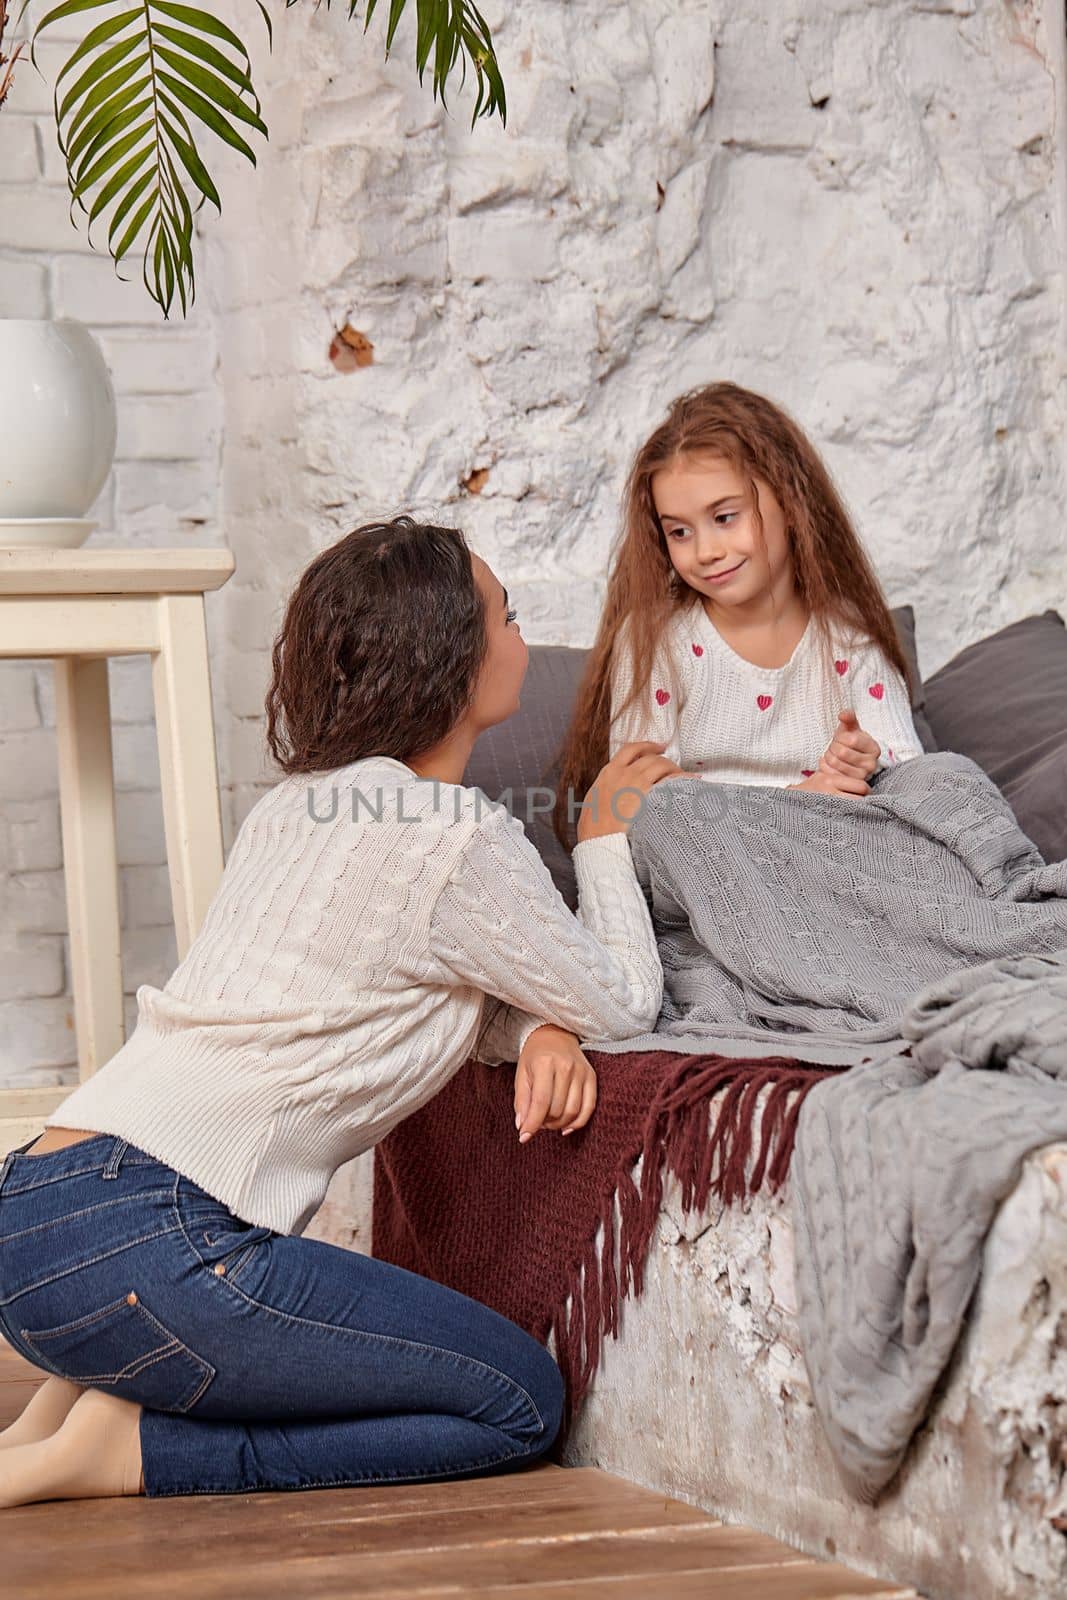 Mother and daughter sitting on sill near window in room. They show emotions and have fun